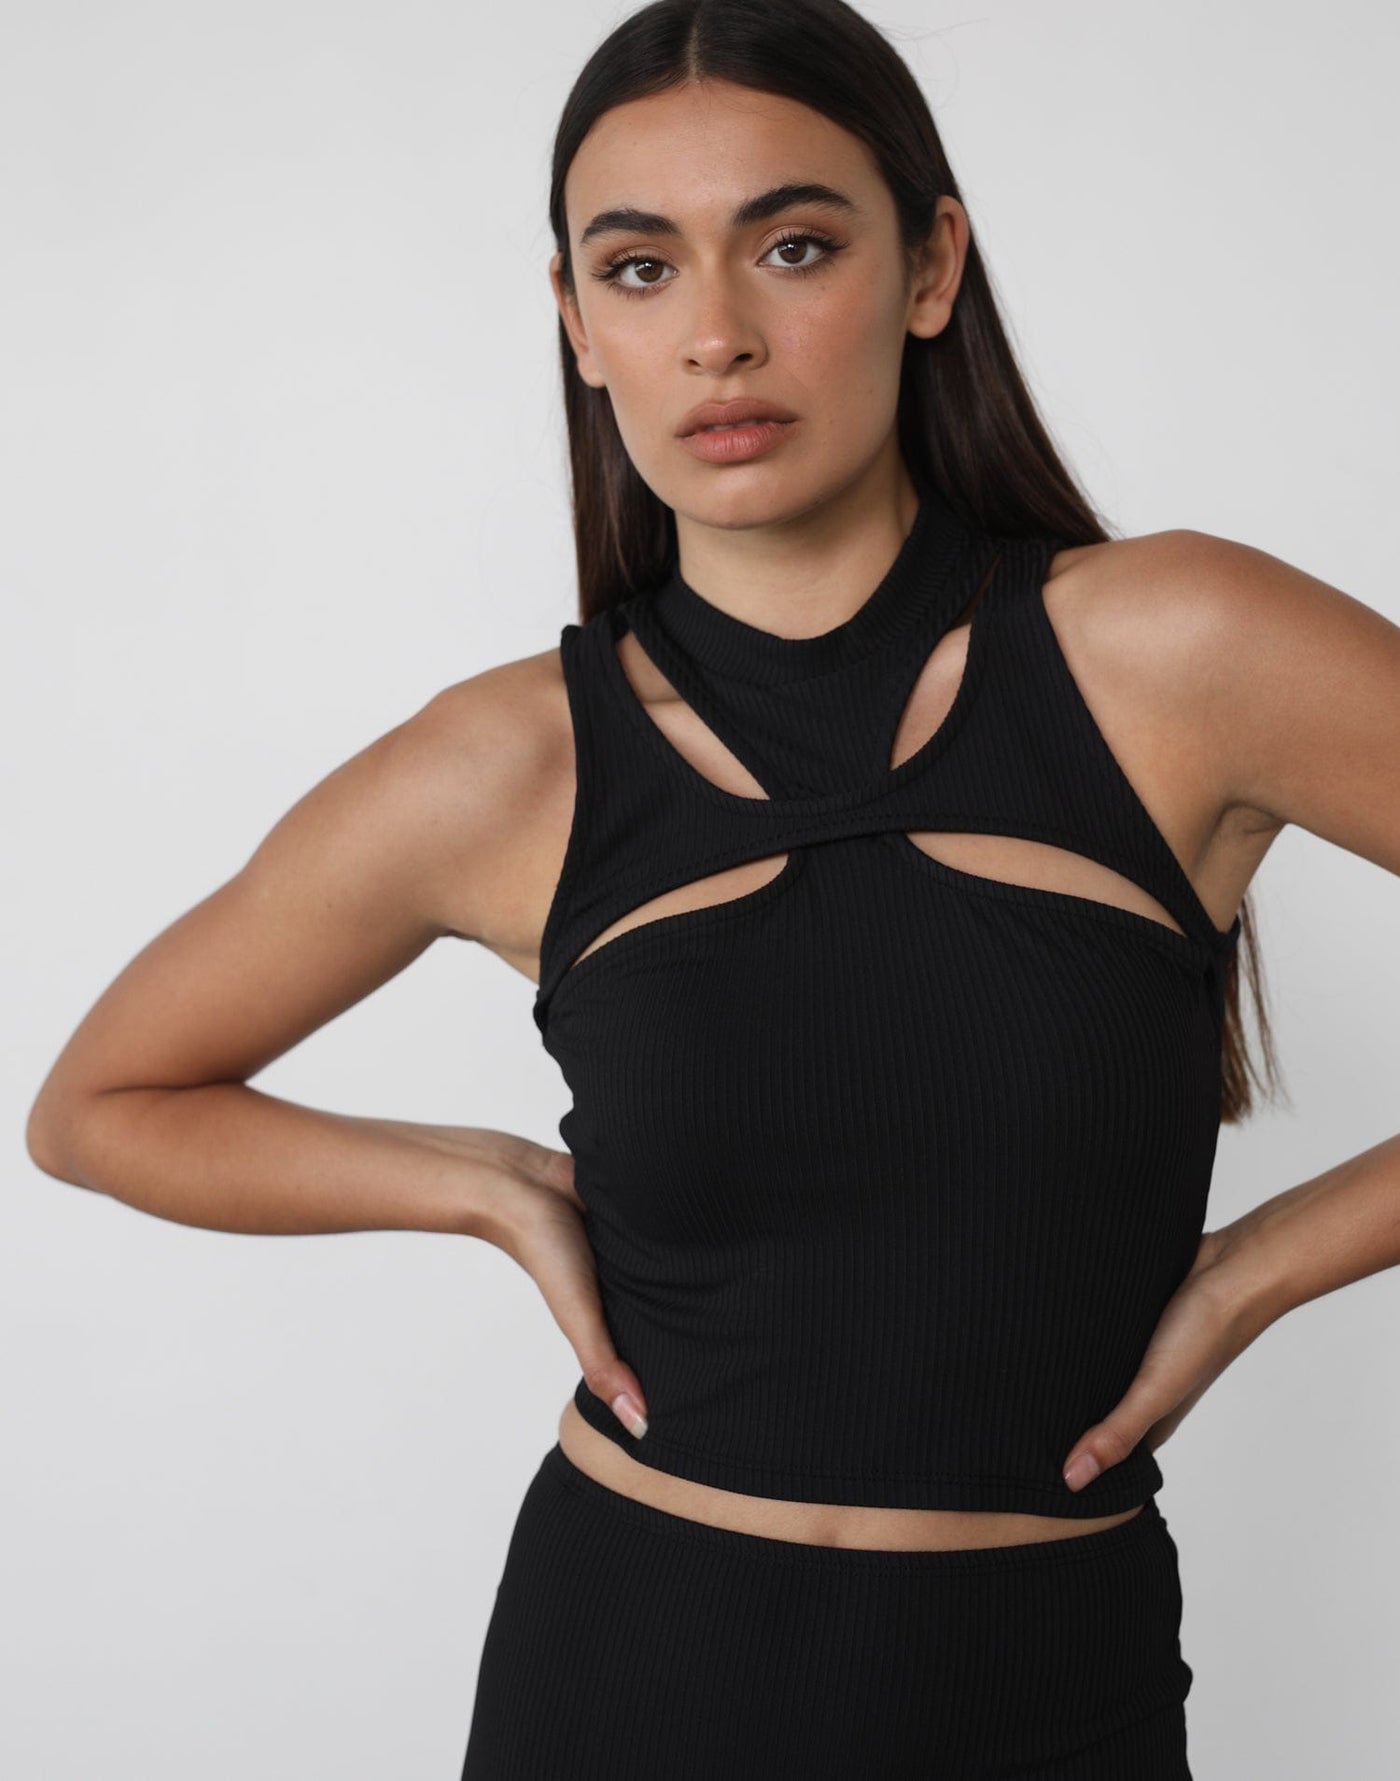 Inferno Top (Black) - Black Cut Out Top - Women's Tops - Charcoal Clothing